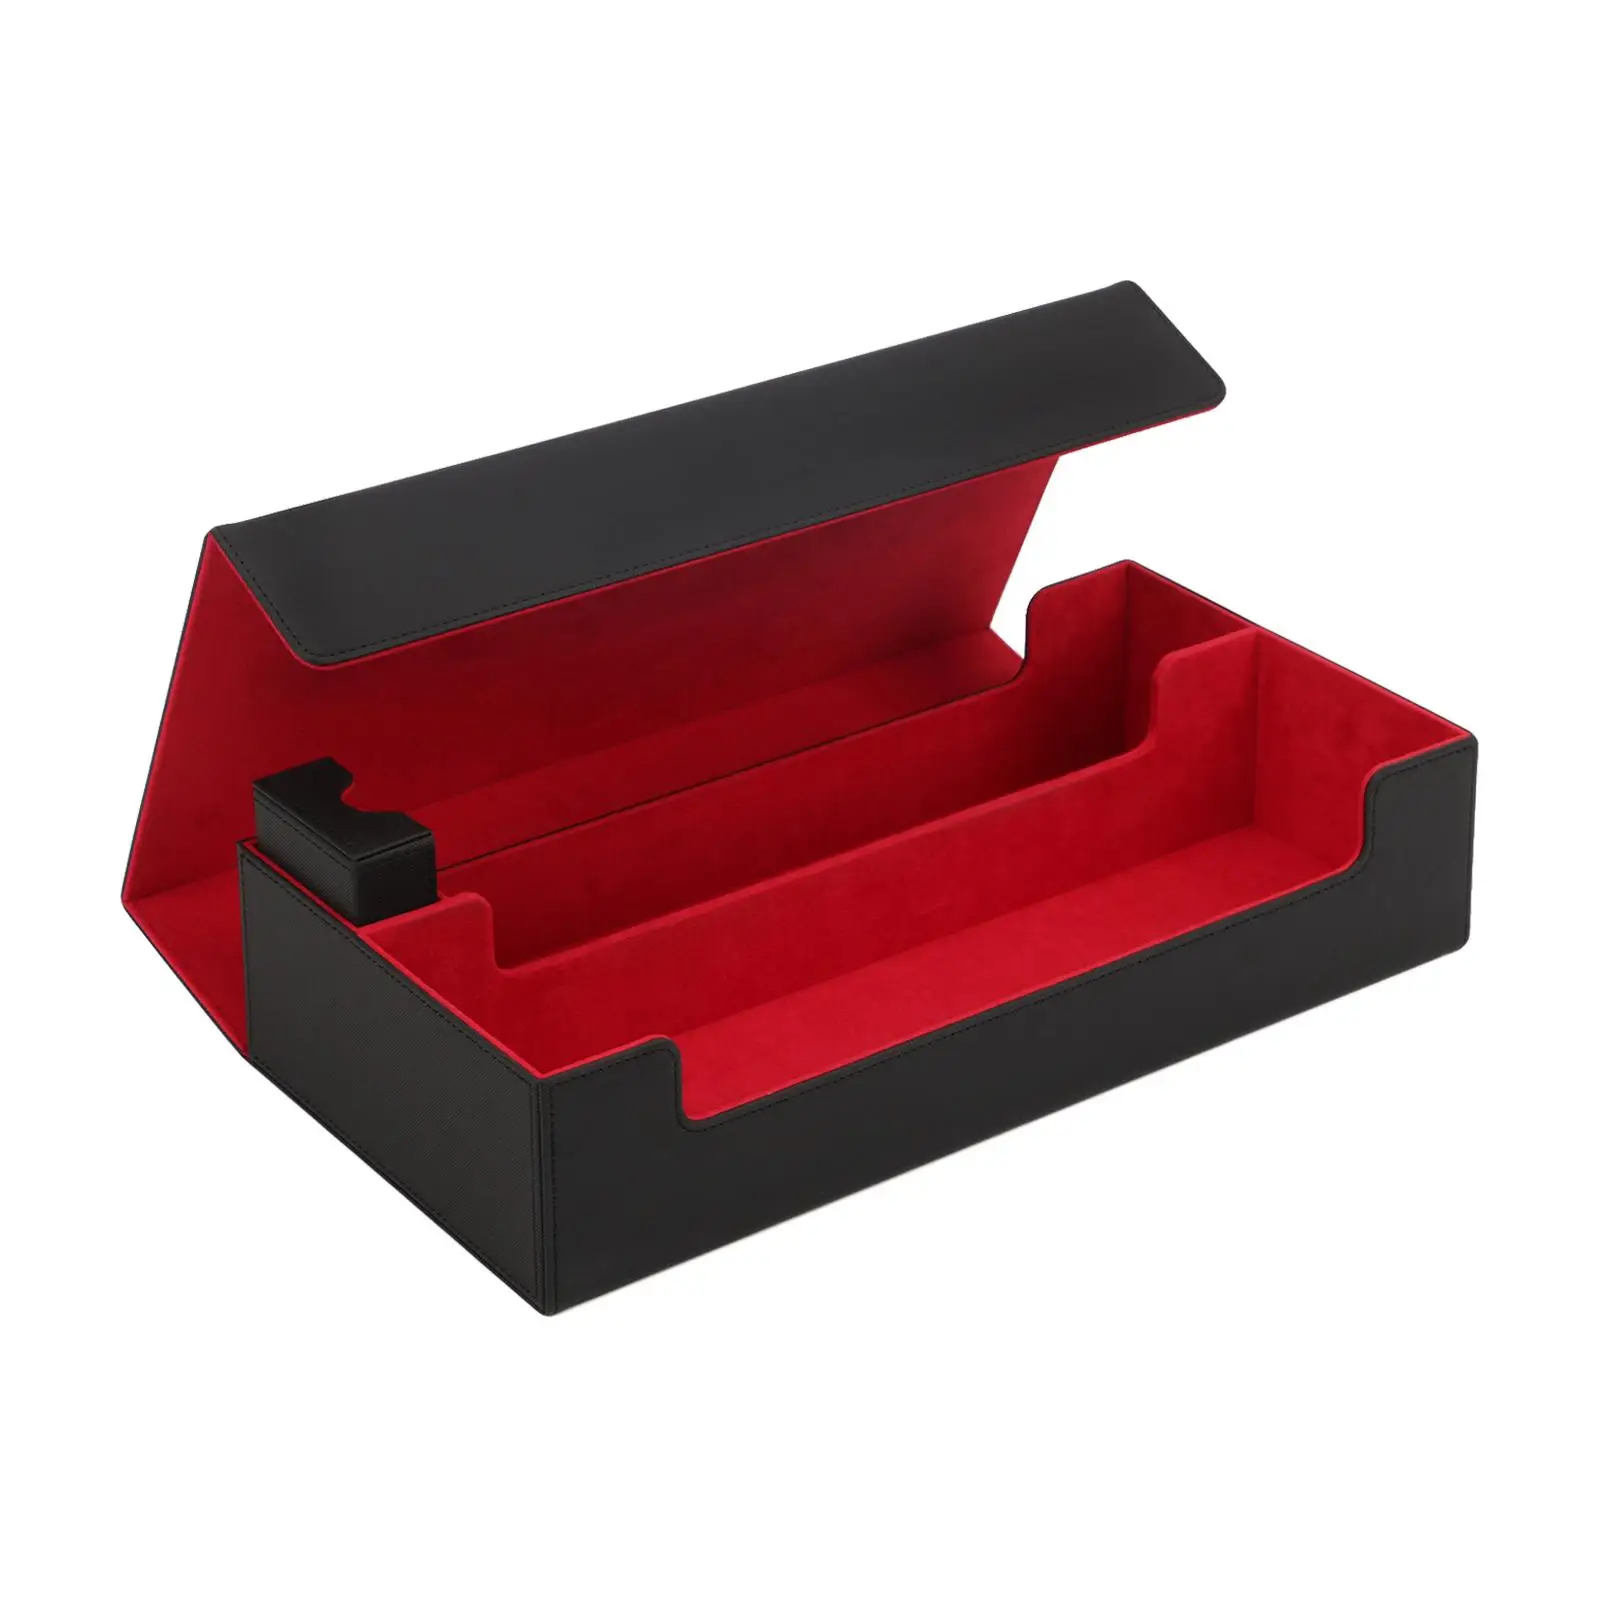 Trading Card Deck Box, Organizer Holder Storage Display Holds Standard Sturdy Cards Case Carrying Game Card for Tcg